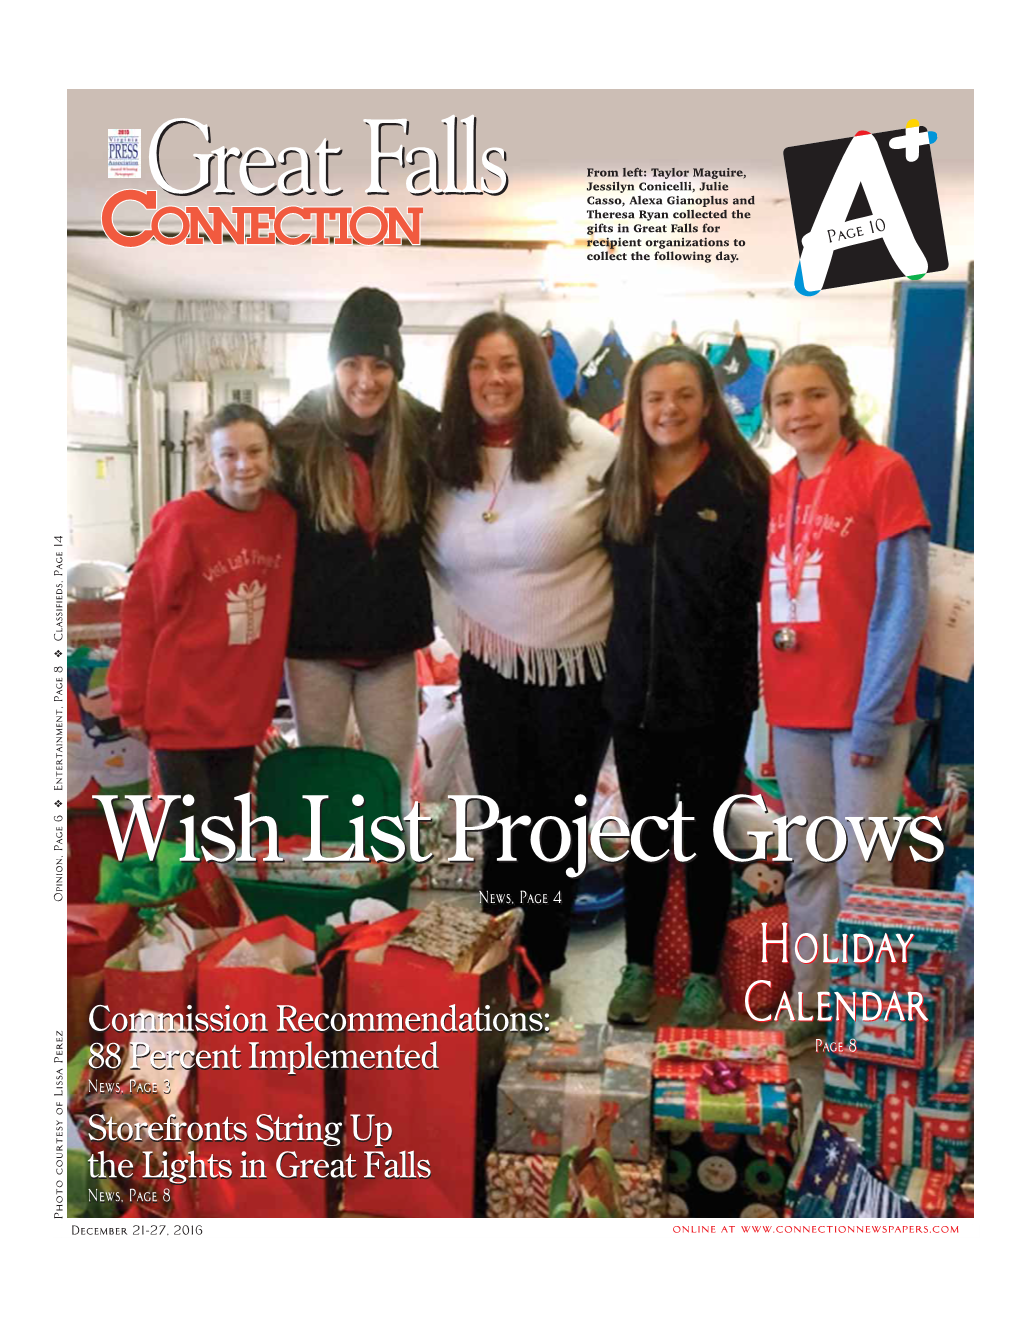 Great Fallsfalls Casso, Alexa Gianoplus and Theresa Ryan Collected the Gifts in Great Falls for Recipient Organizations to Page 10 Collect the Following Day